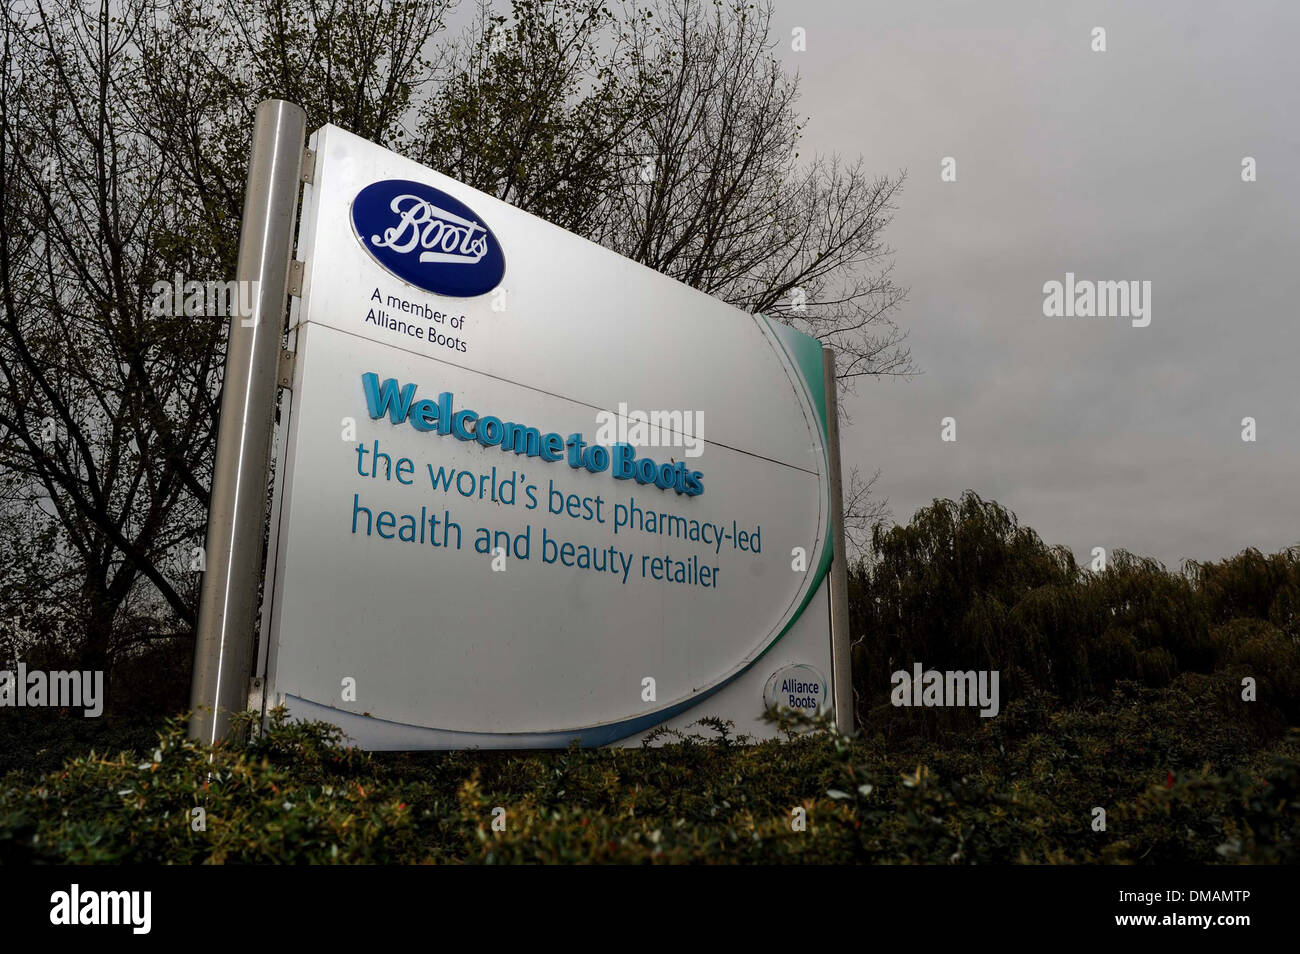 Boots Hq High Resolution Stock Photography and Images - Alamy